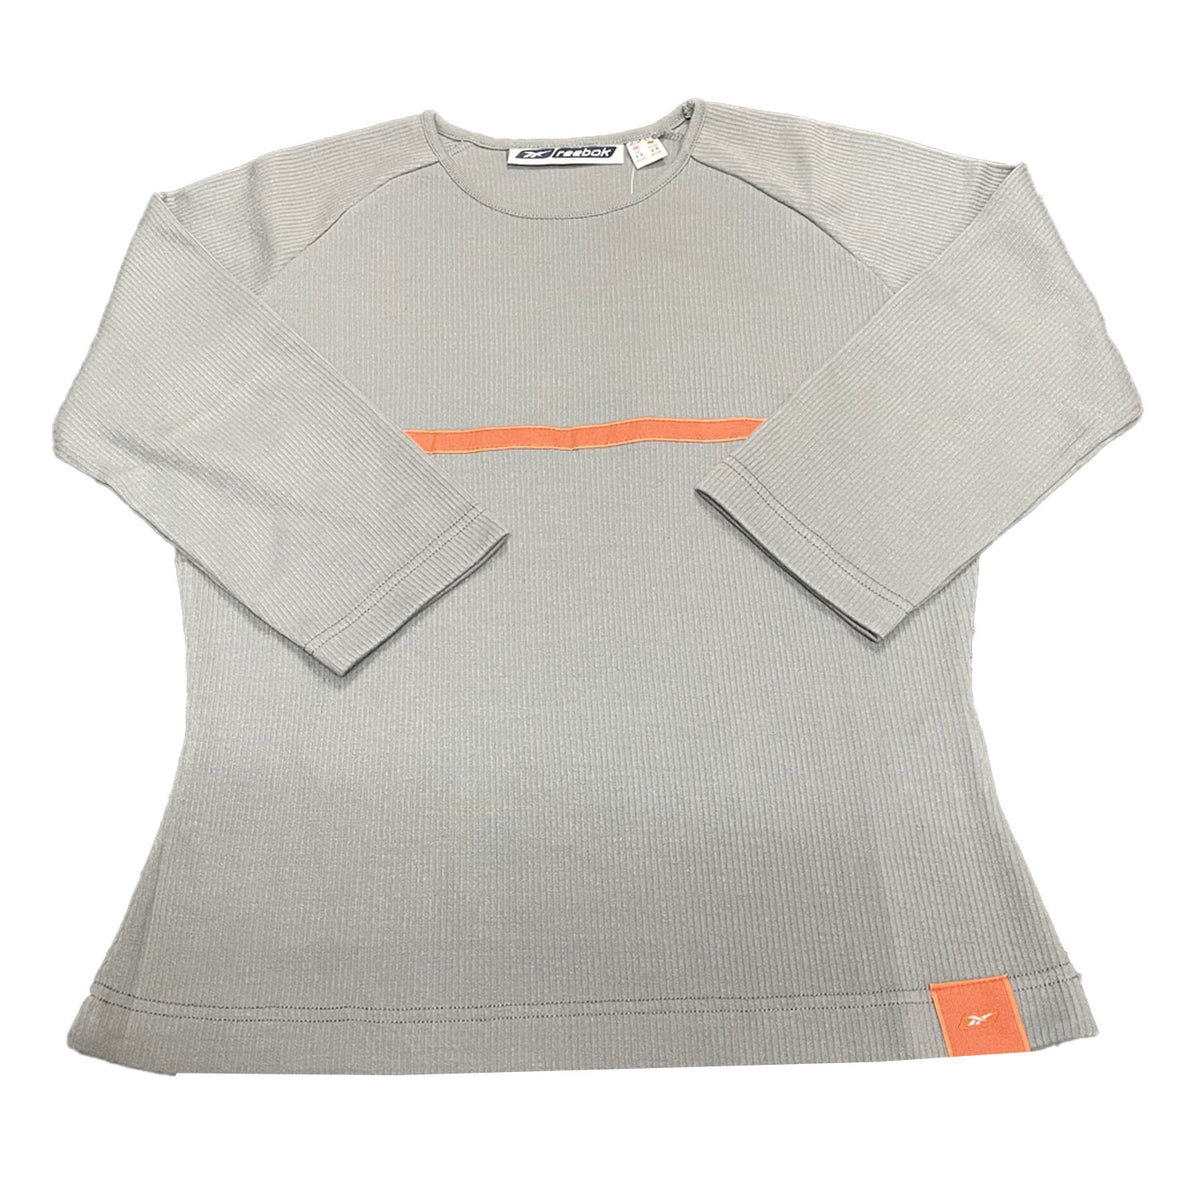 Reebok Womens Lined Classic Top 10 - RRP £19.99